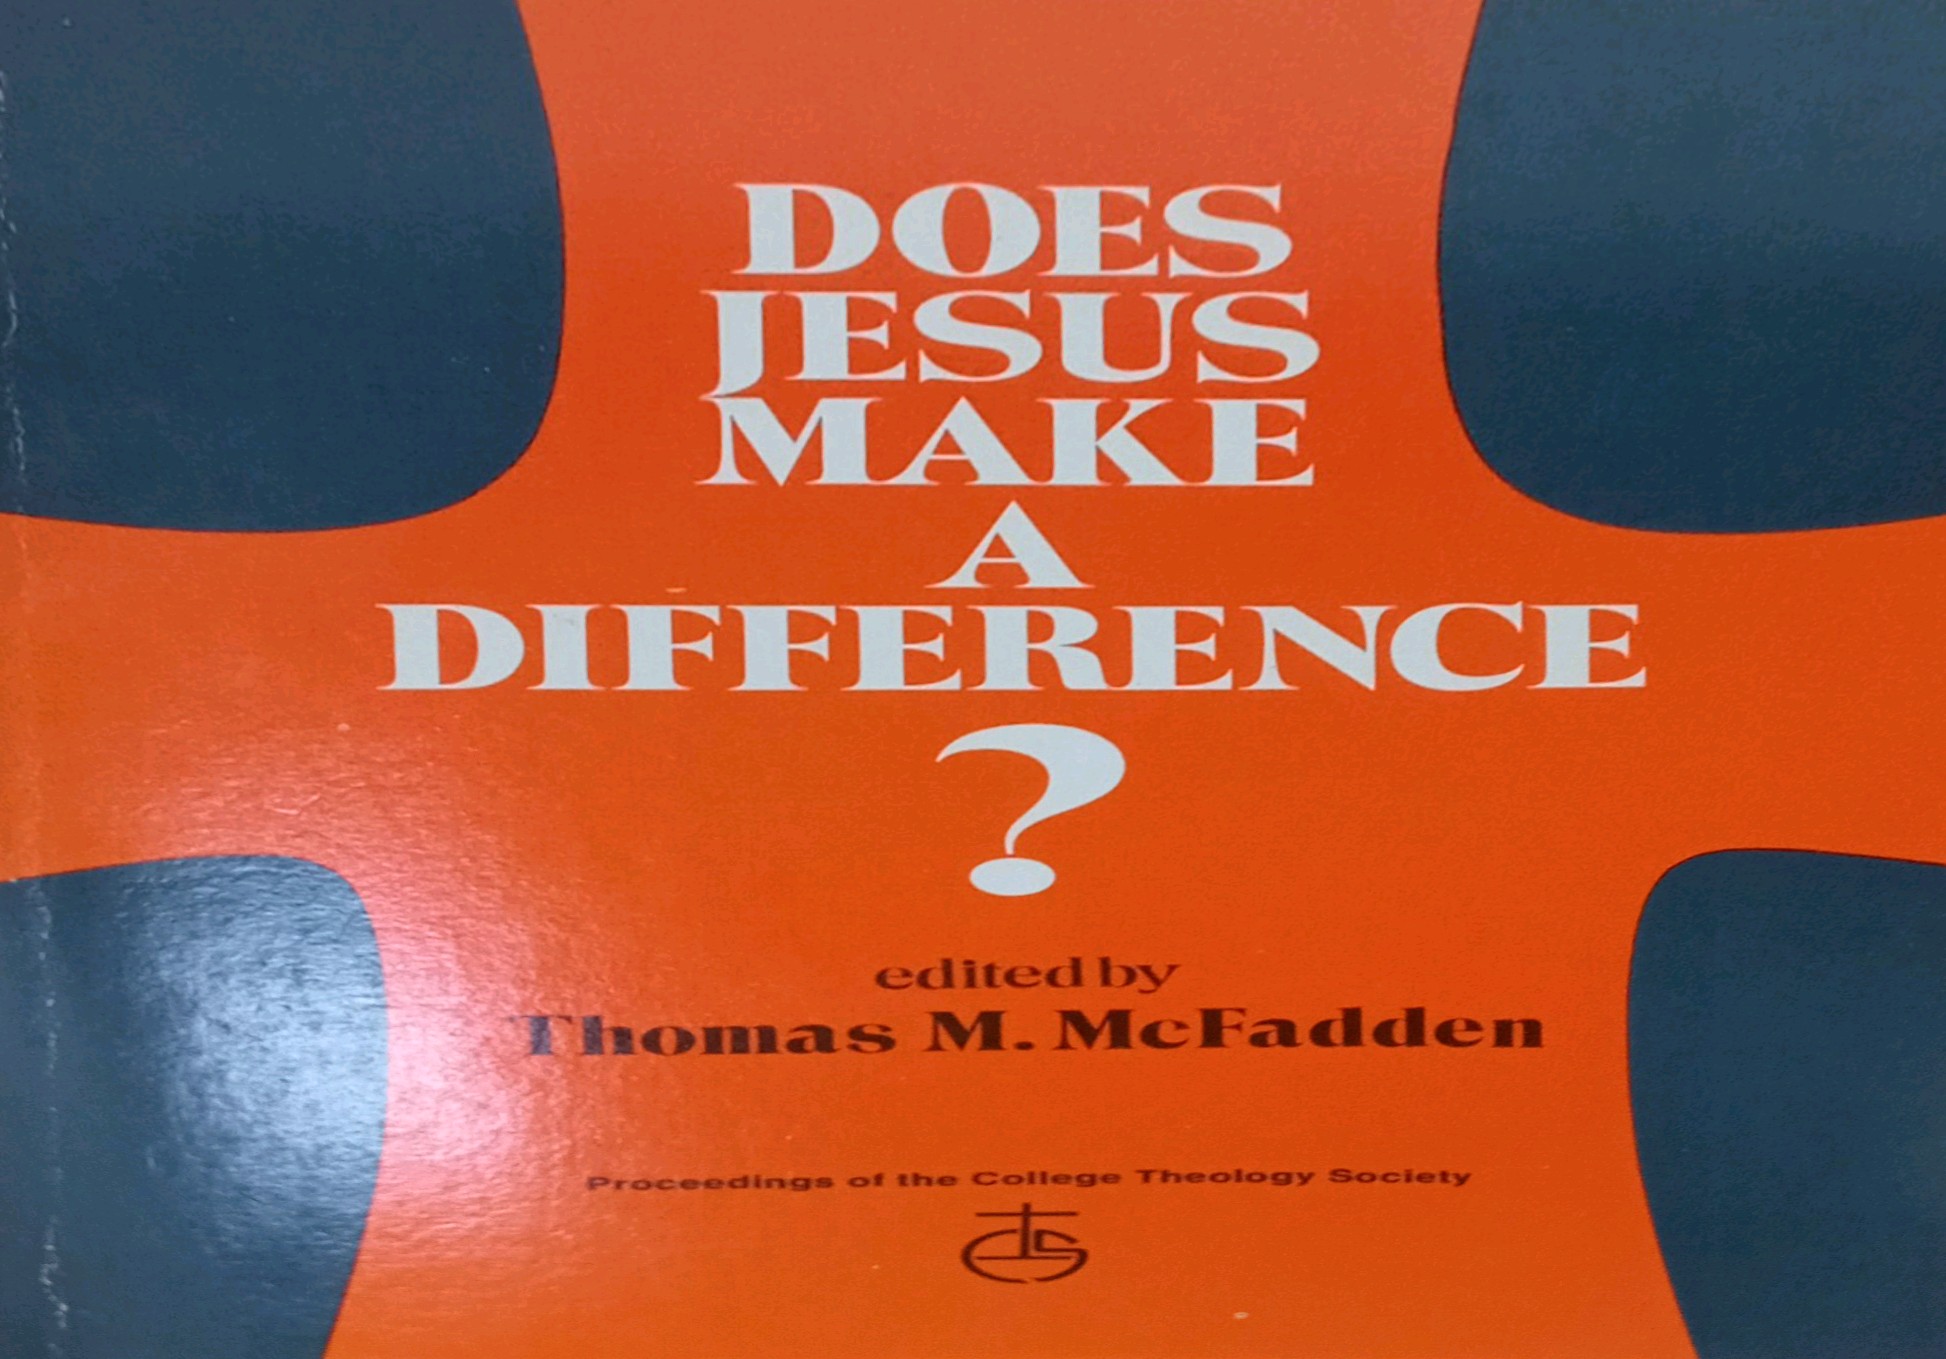 DOES JESUS MAKE A DIFFERENCE? 